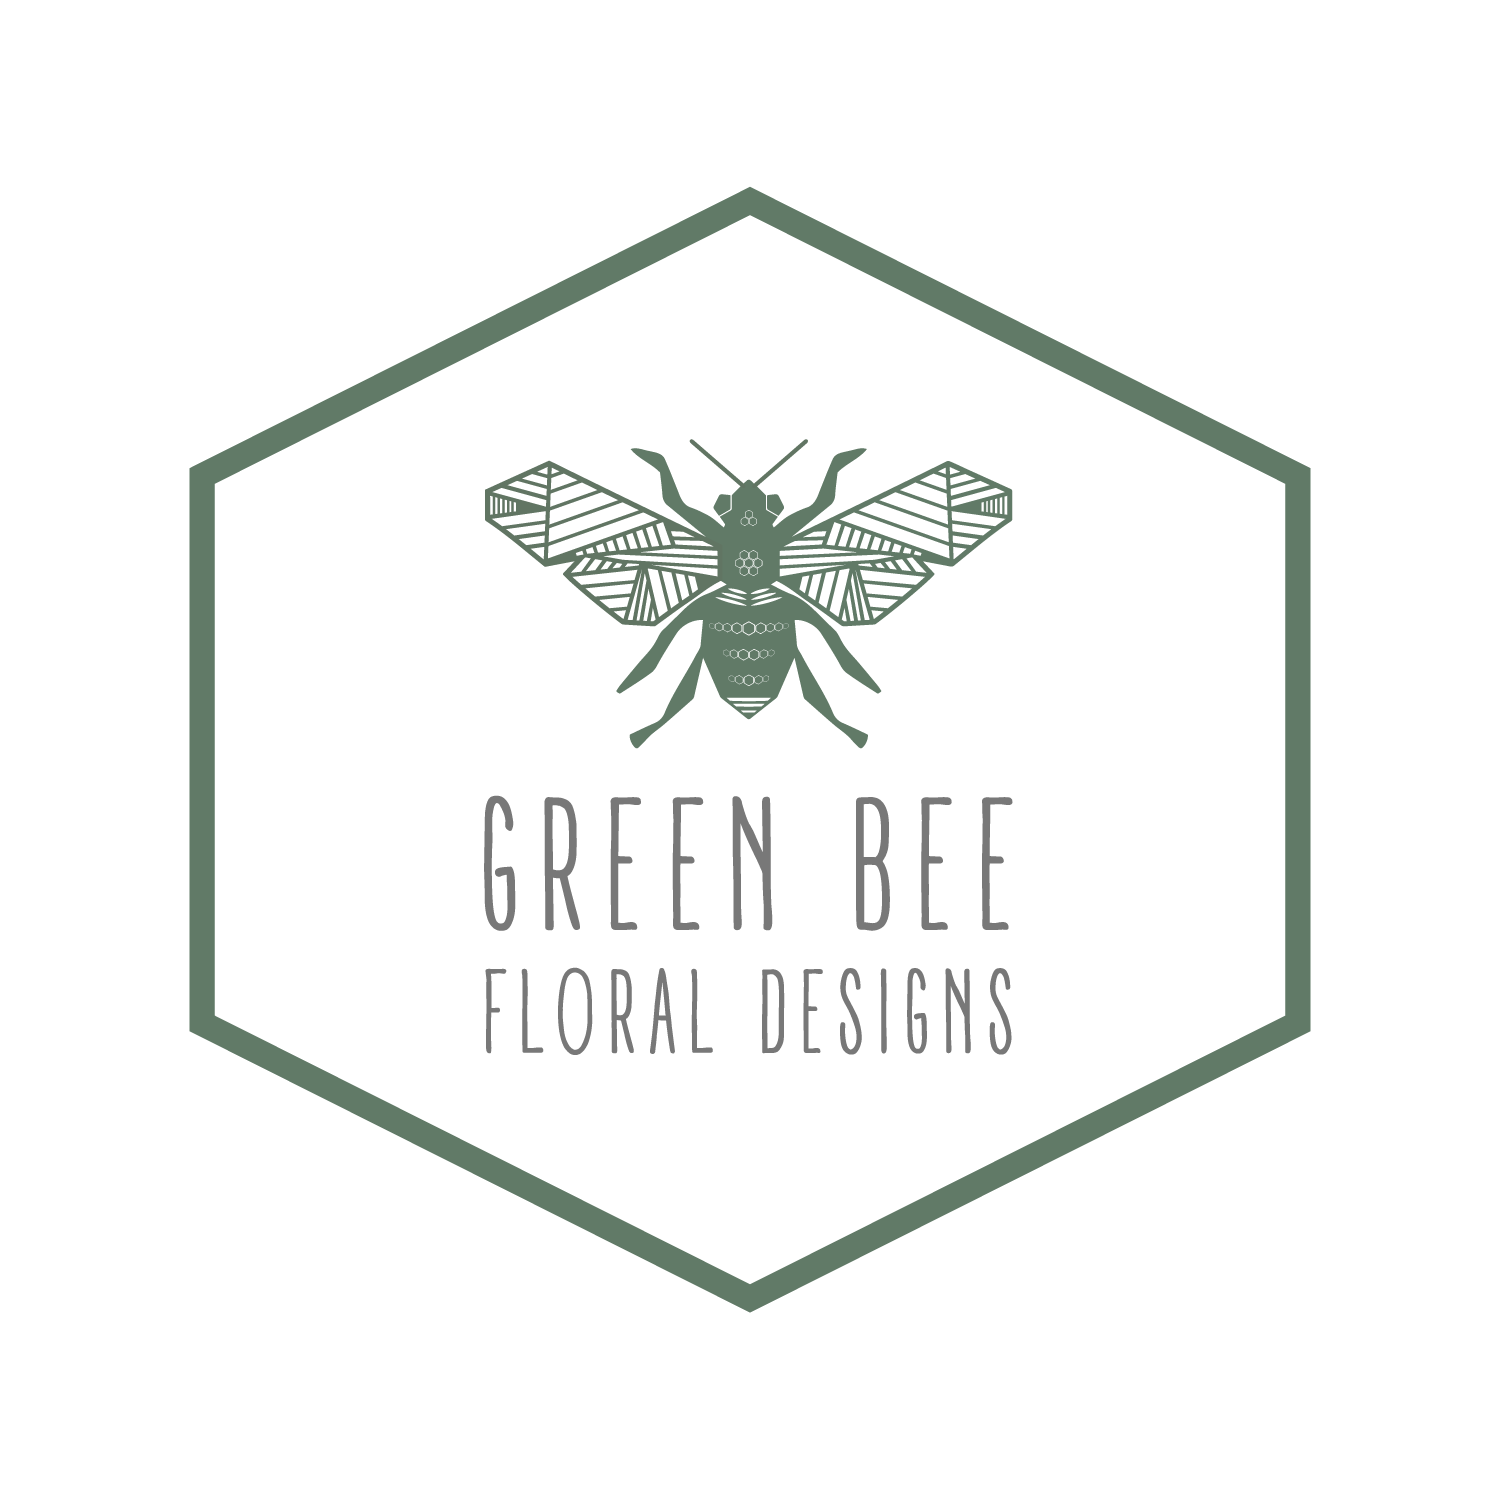 Green Bee Floral Designs